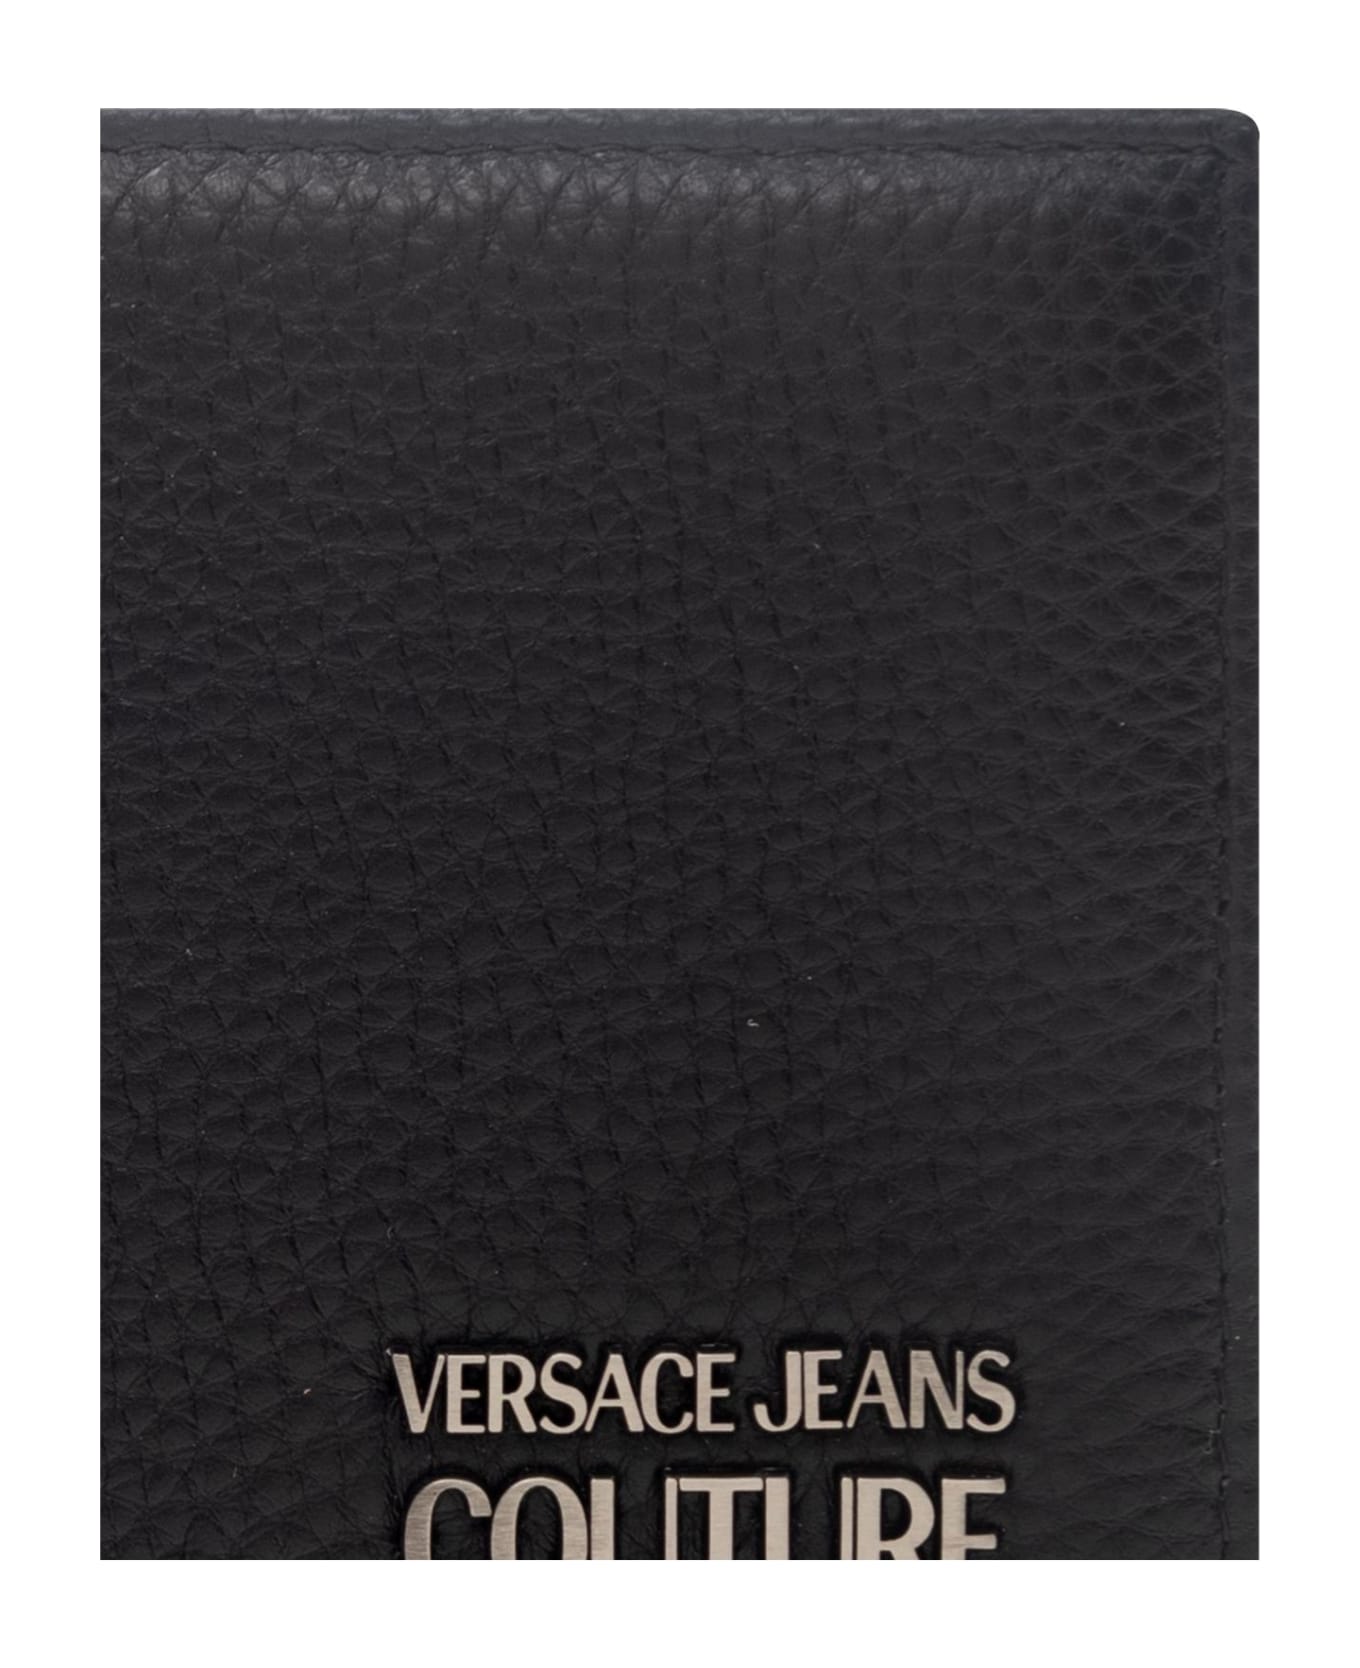 Versace Jeans Couture Wallet - BLACK/SILVER